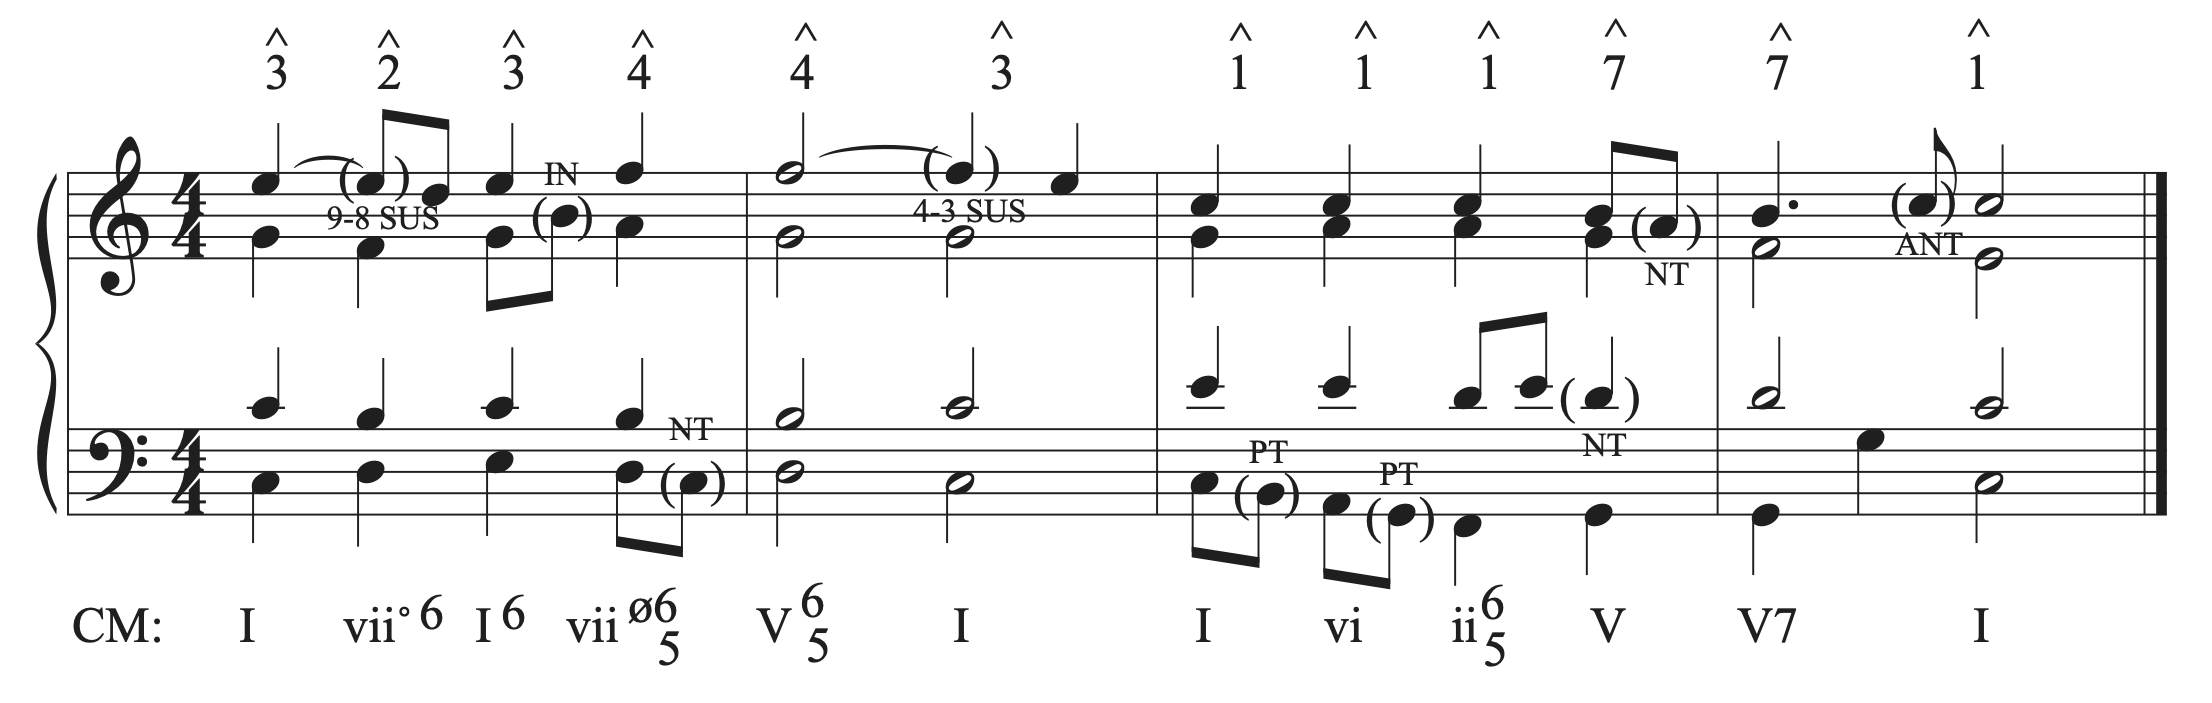 The musical example in C major with an incomplete neighbor tone added.